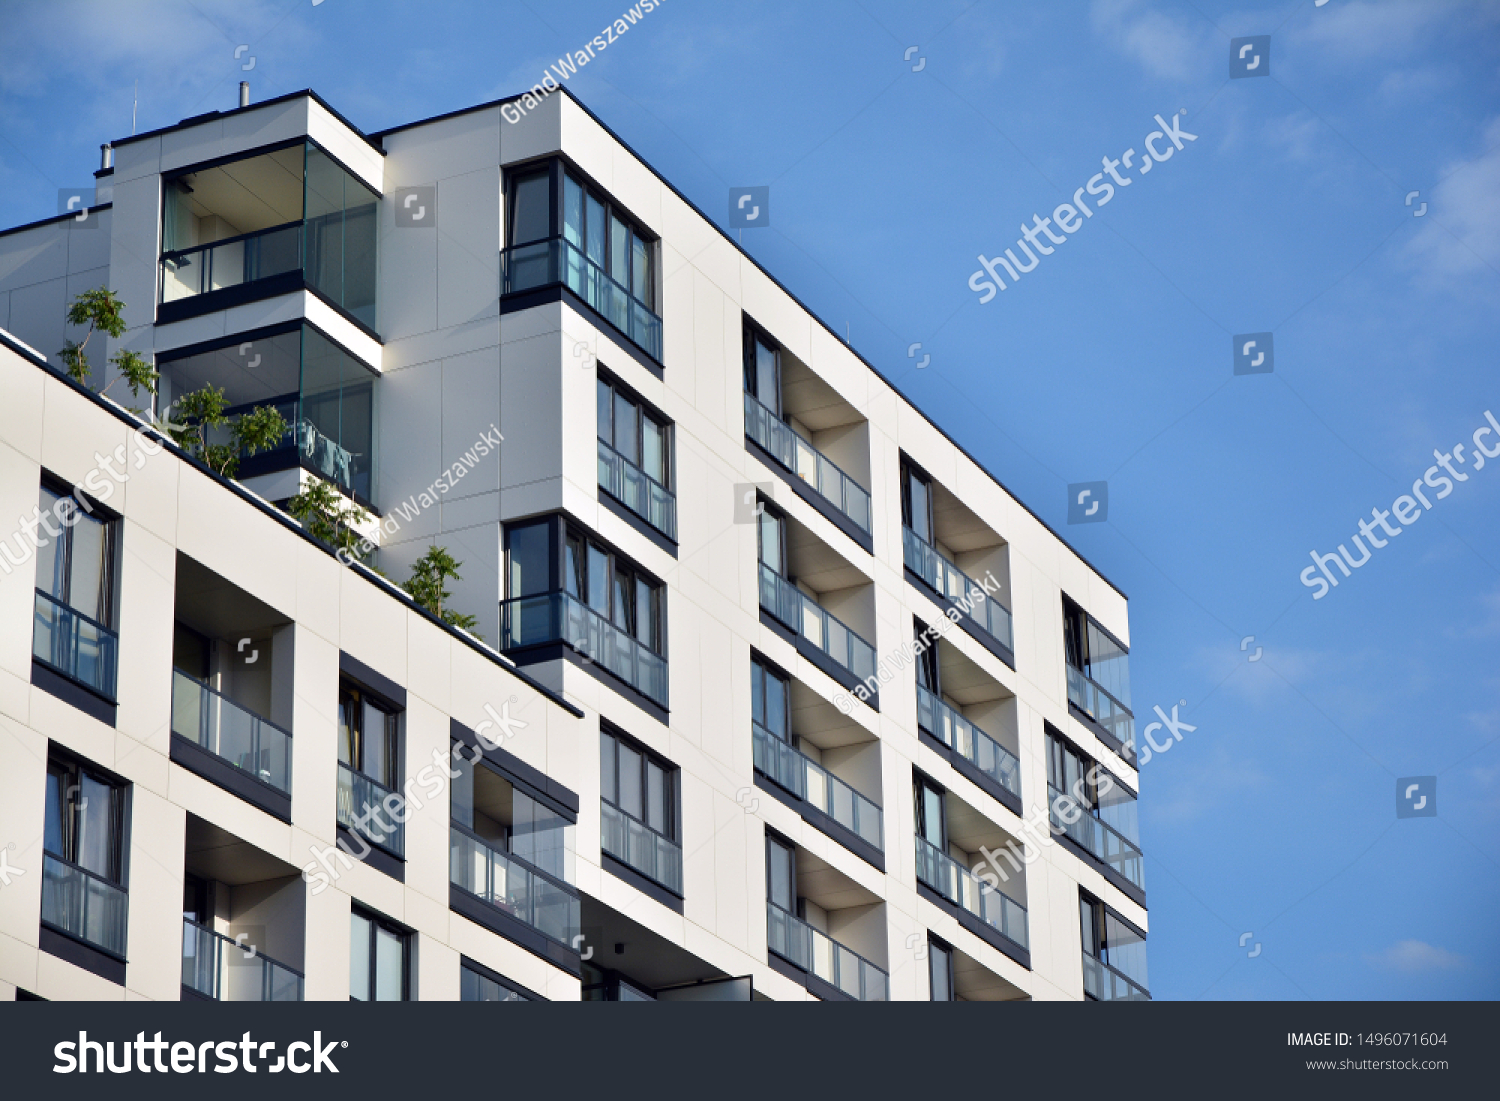 Modern and new apartment building. Multistoried modern, new and stylish living block of flats. #1496071604